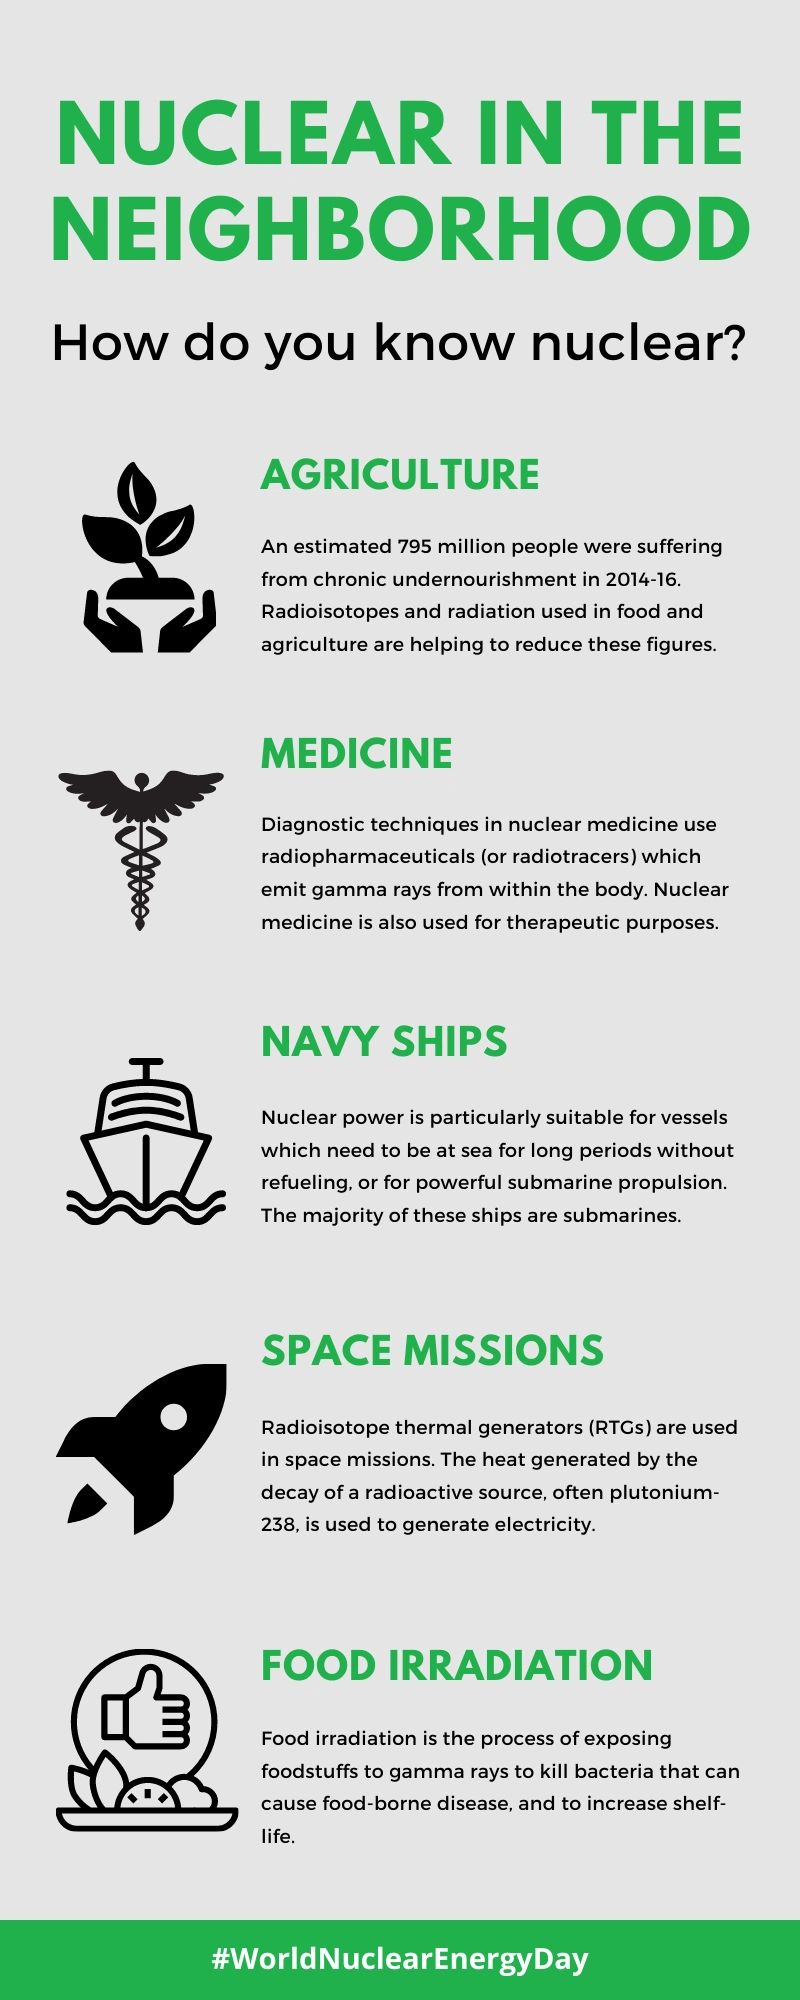 uses of nuclear energy in medicine